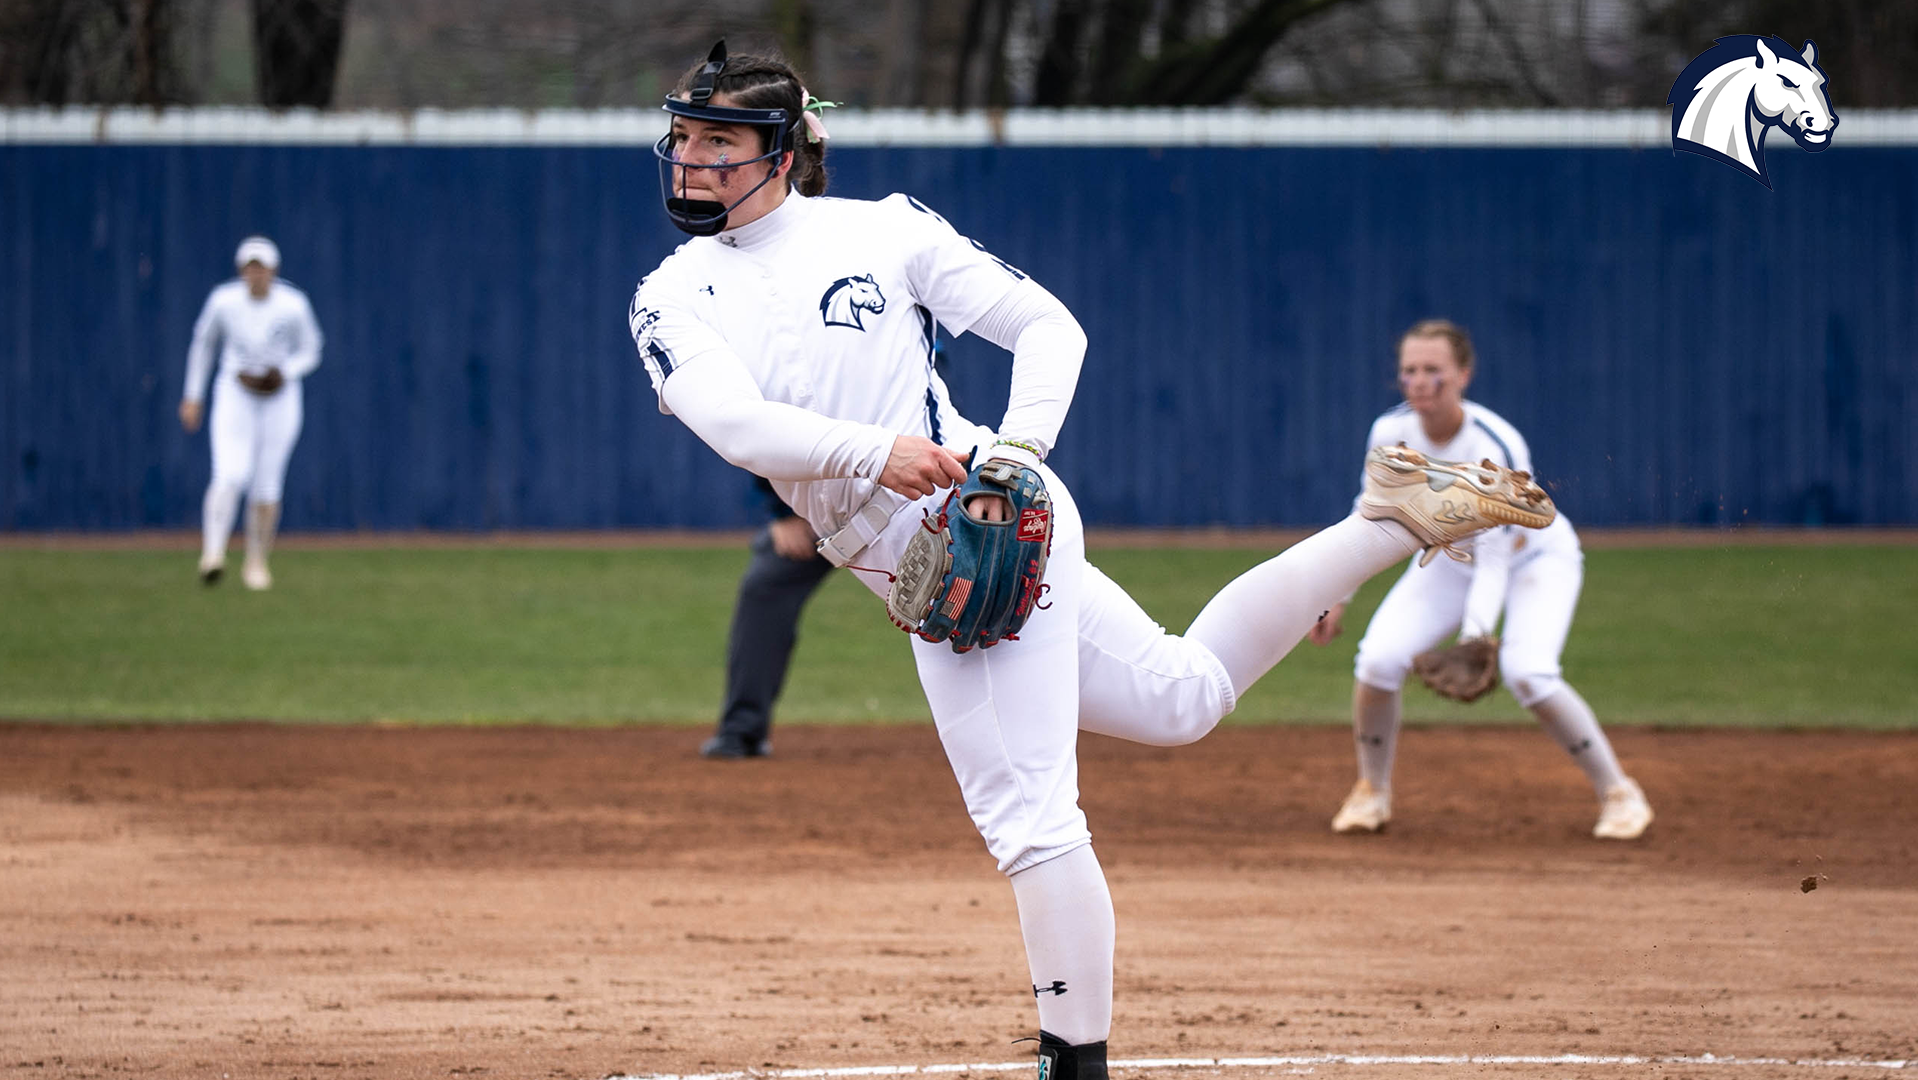 Chargers sweep past Thomas More to end homestand on a successful note